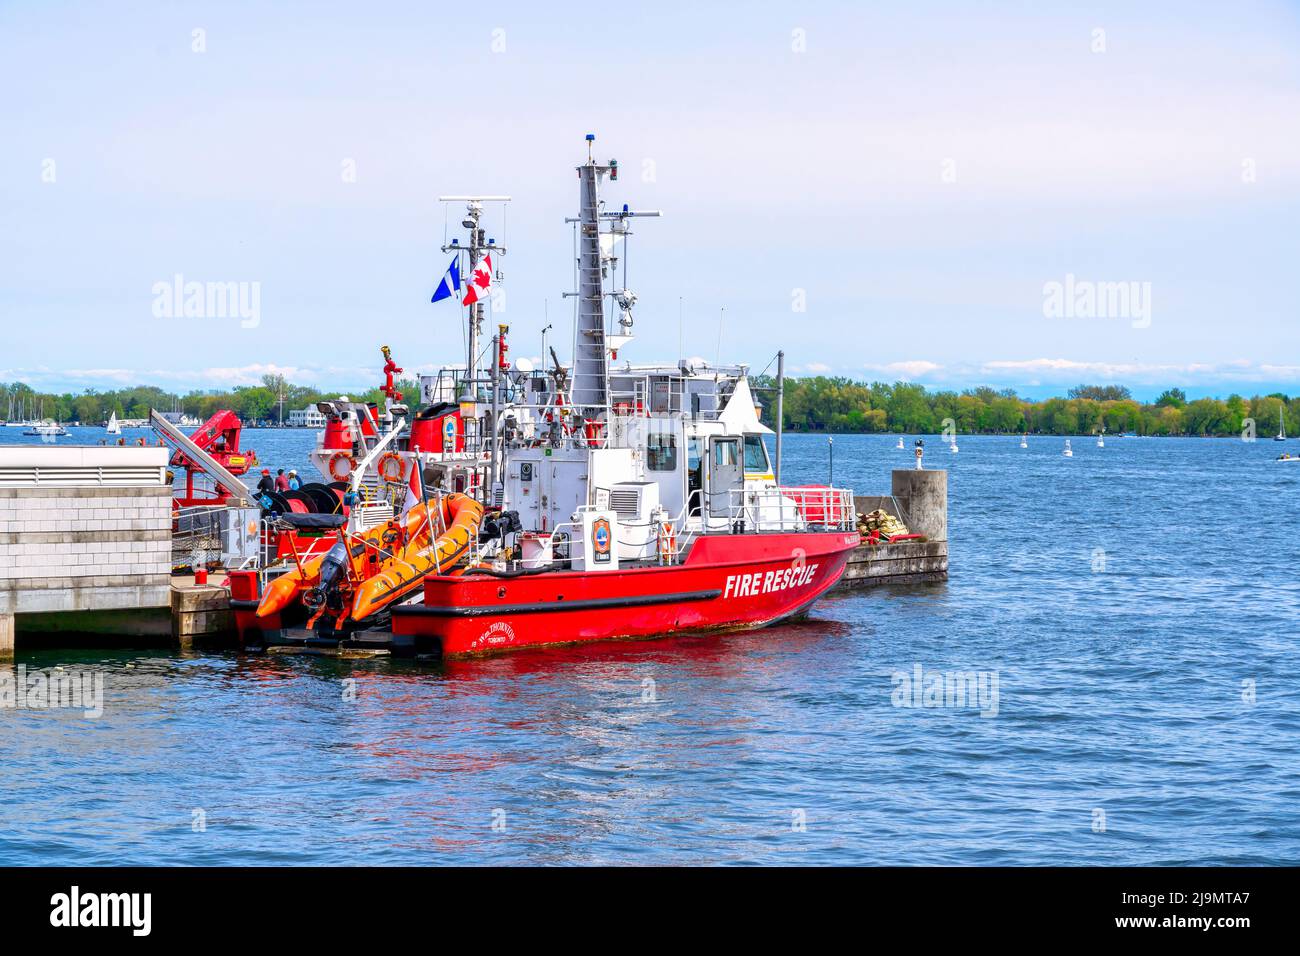 A fire rescue boat is moored in the city waterfront. The water vehicle serves incidents happening in the Lake Ontario Stock Photo